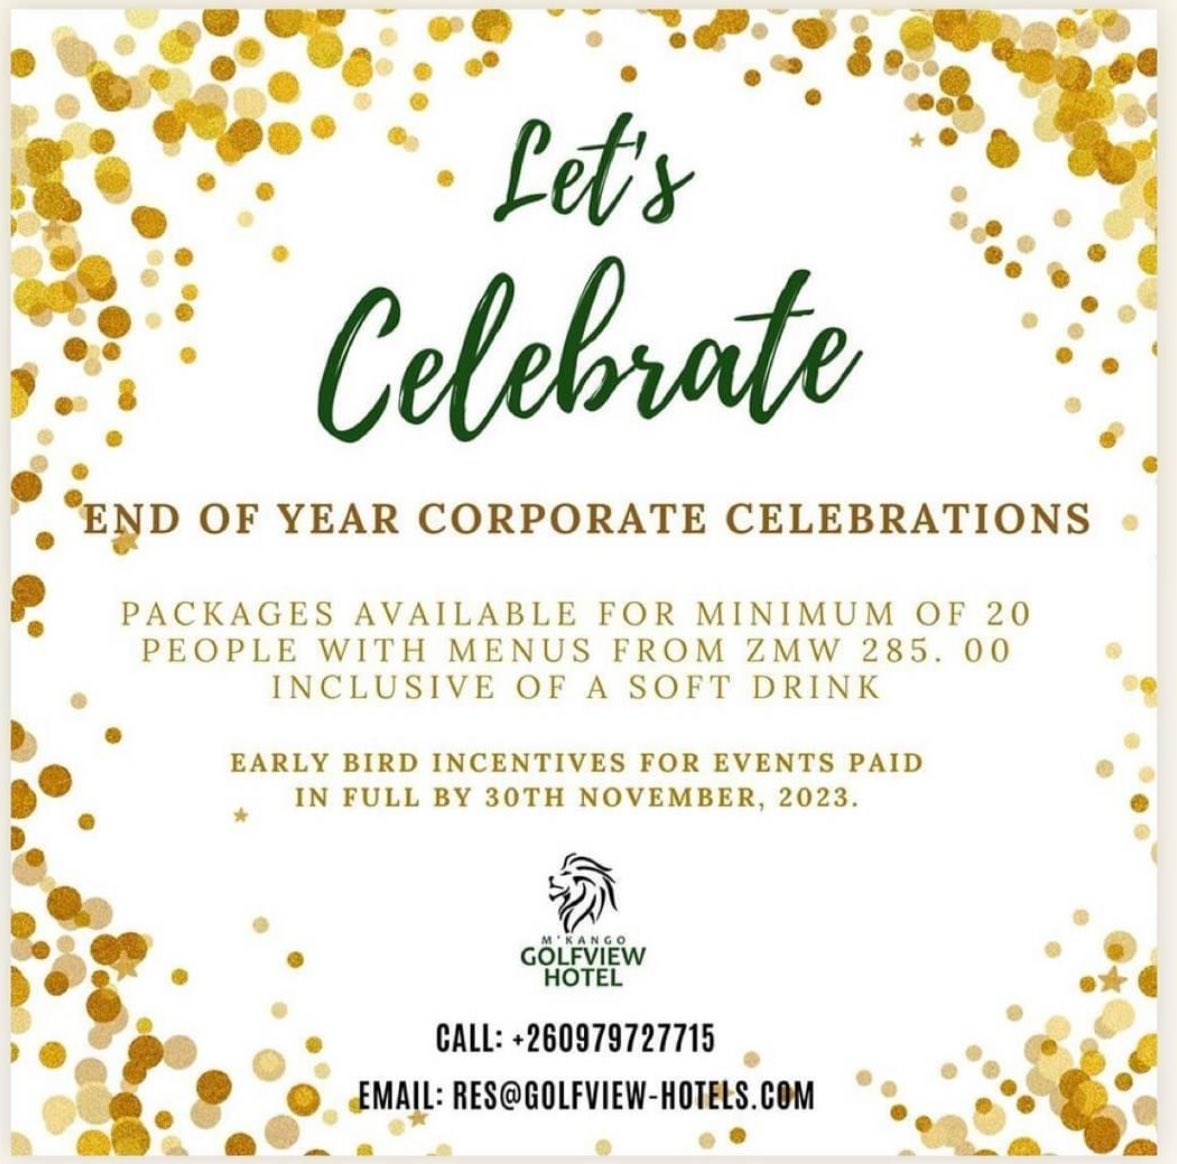 Let’s make this year’s Corporate End-of-Year #Celebration one to remember! Let M’kango Golfview Hotel show your team that they are the best and deserve to be celebrated by coming to one of the best conference and functions venue in #Lusaka. #Zambia #Hotels